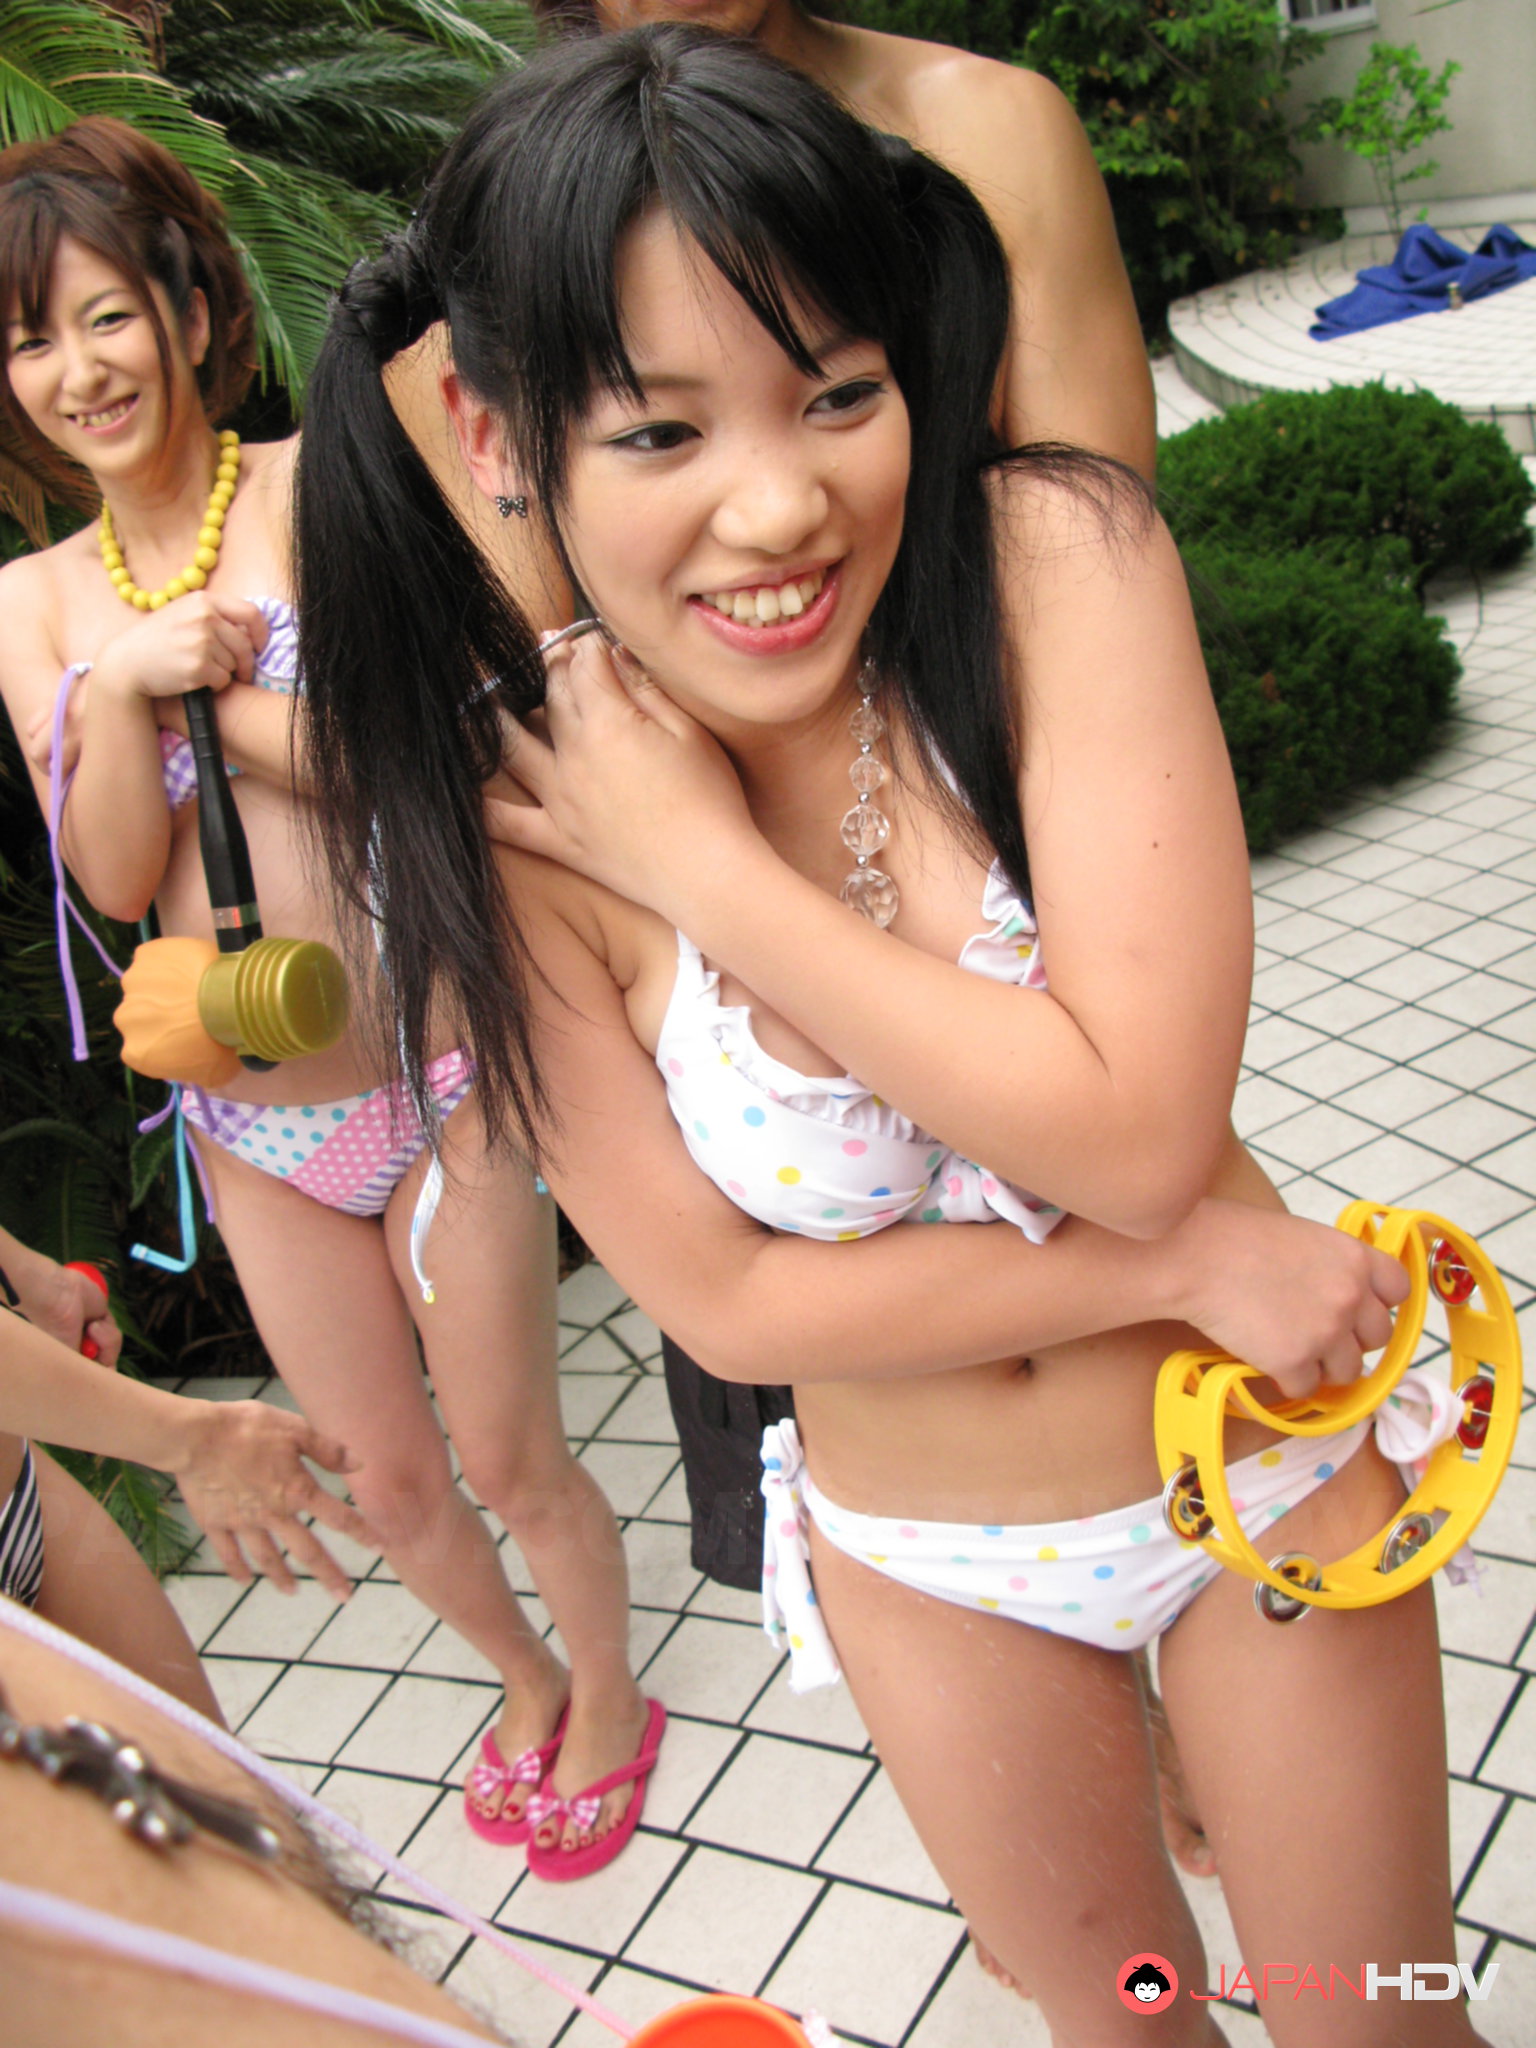 Sexy Pool Porn - Japanese girls enjoy in some sexy pool party